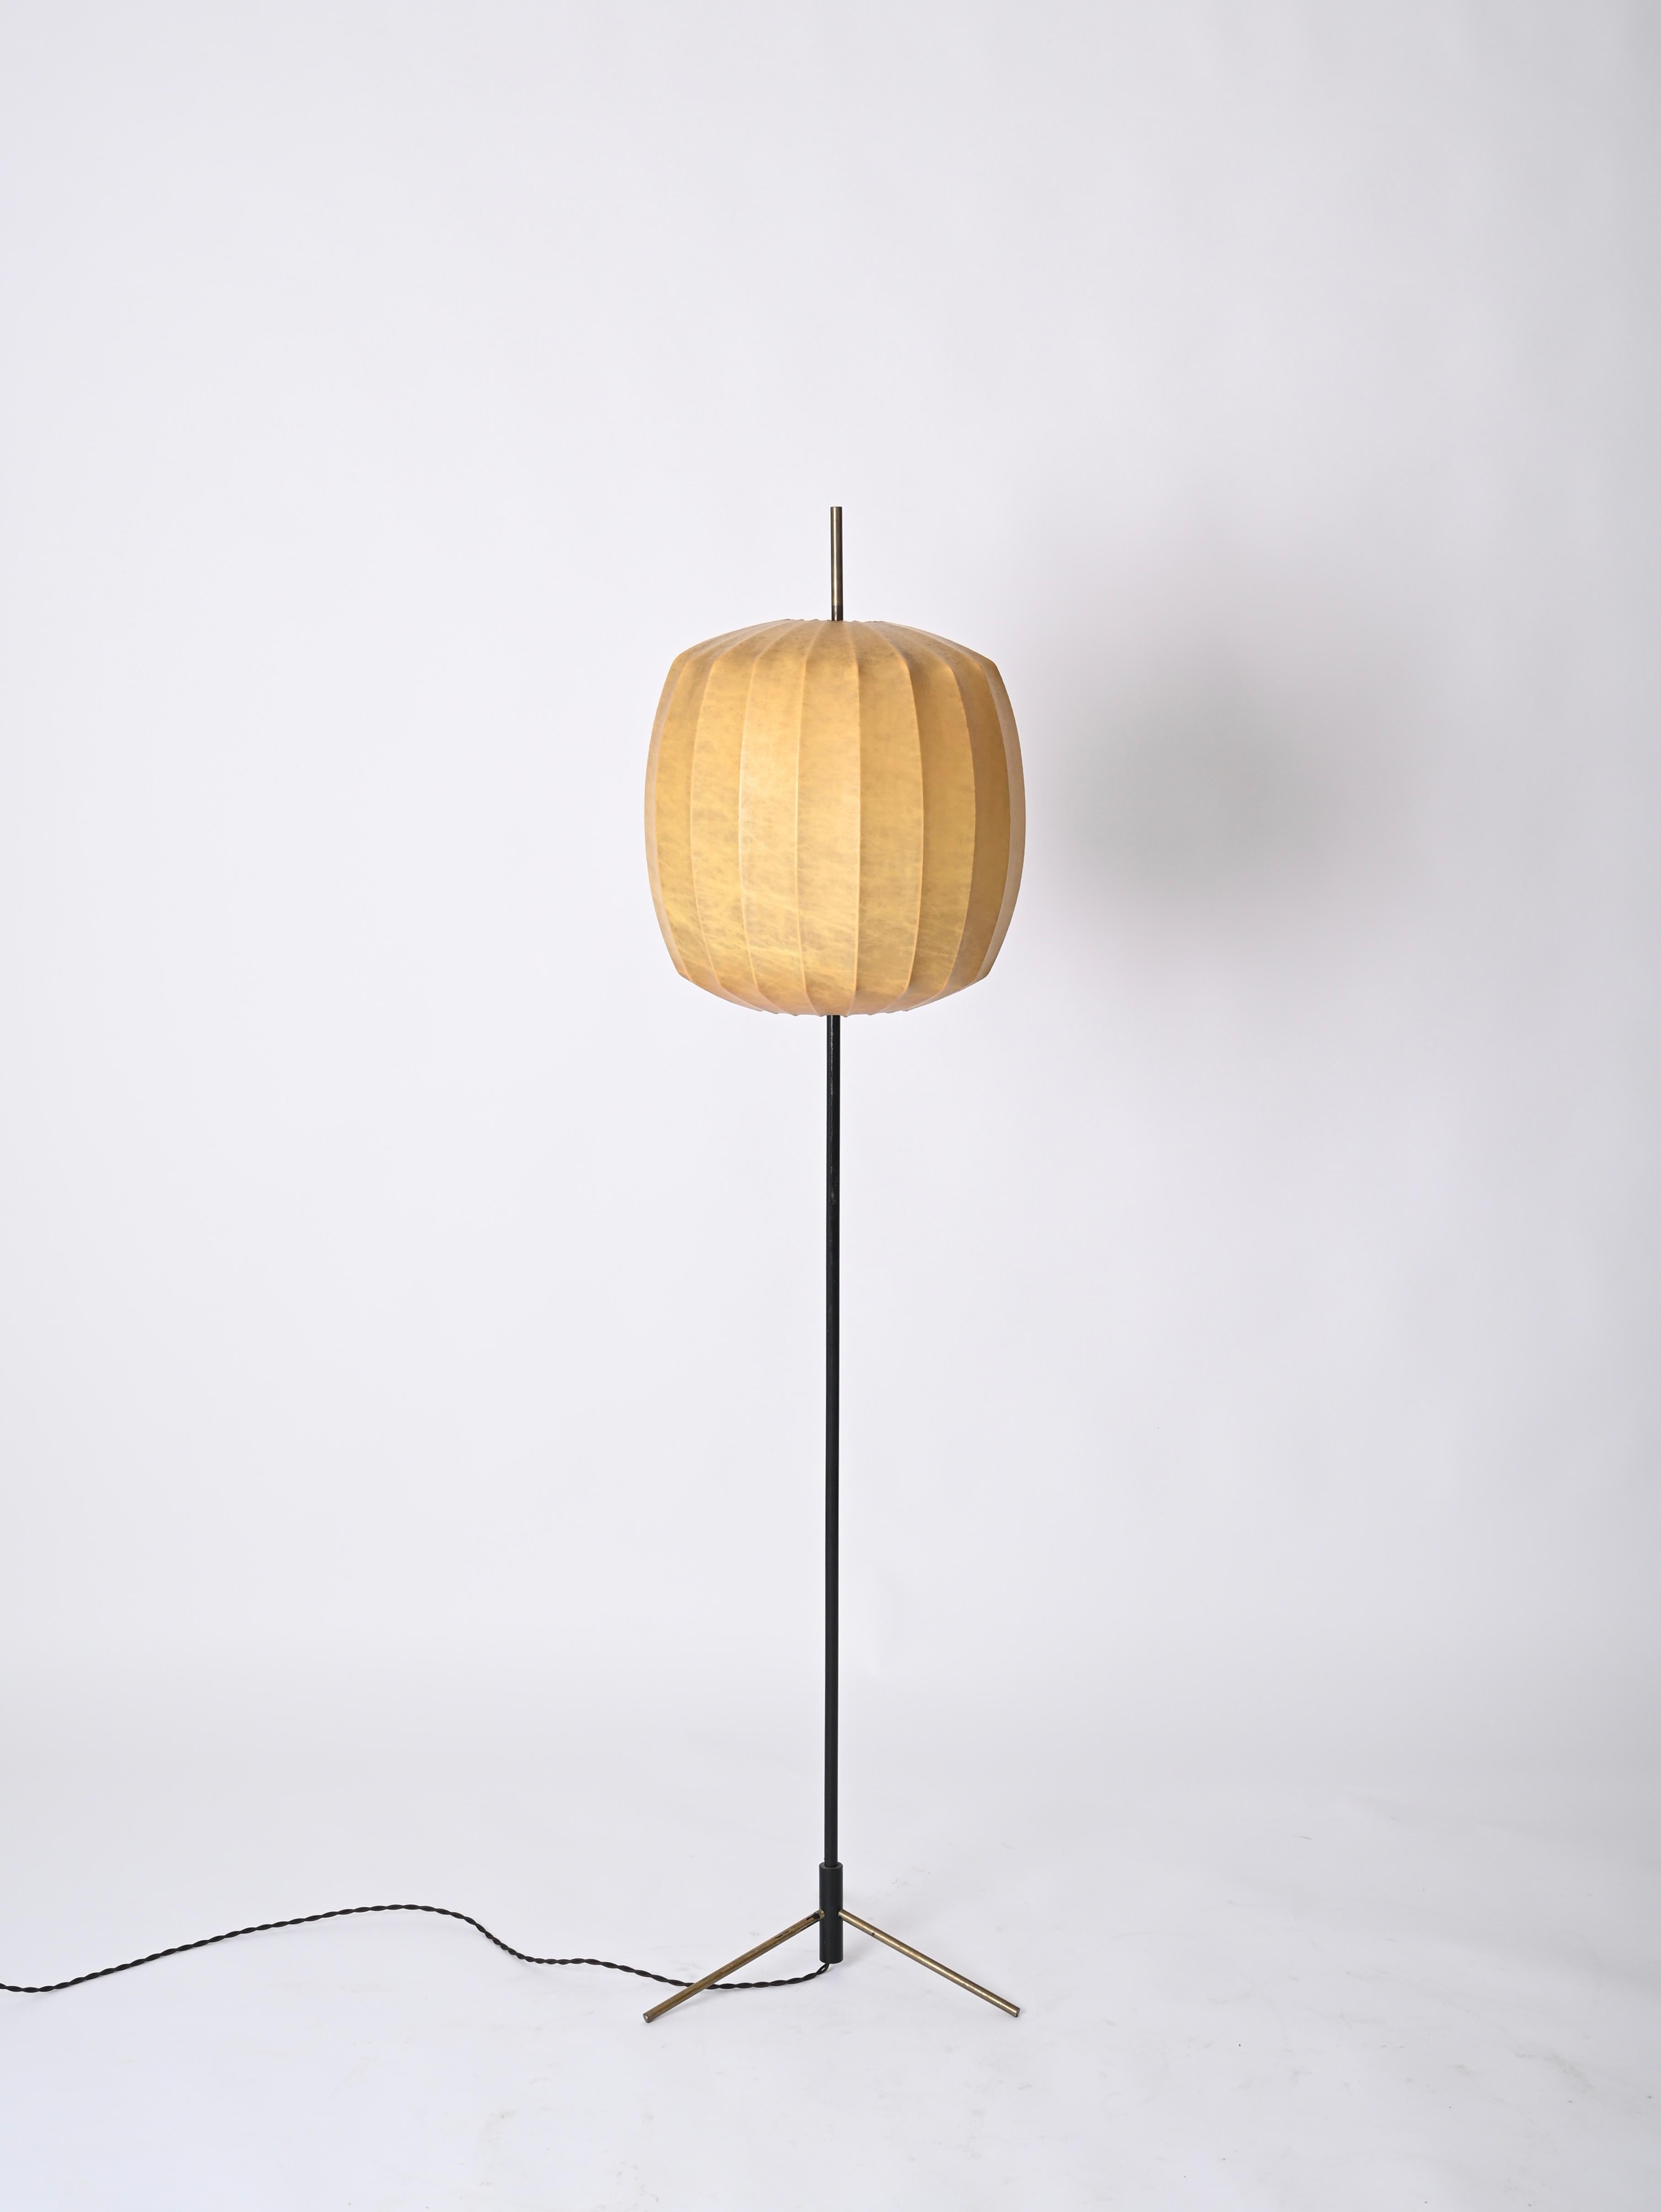 Midcentury Beige Cocoon Floor Lamp in Brass and Metal, Castiglioni, Italy 1960s For Sale 2